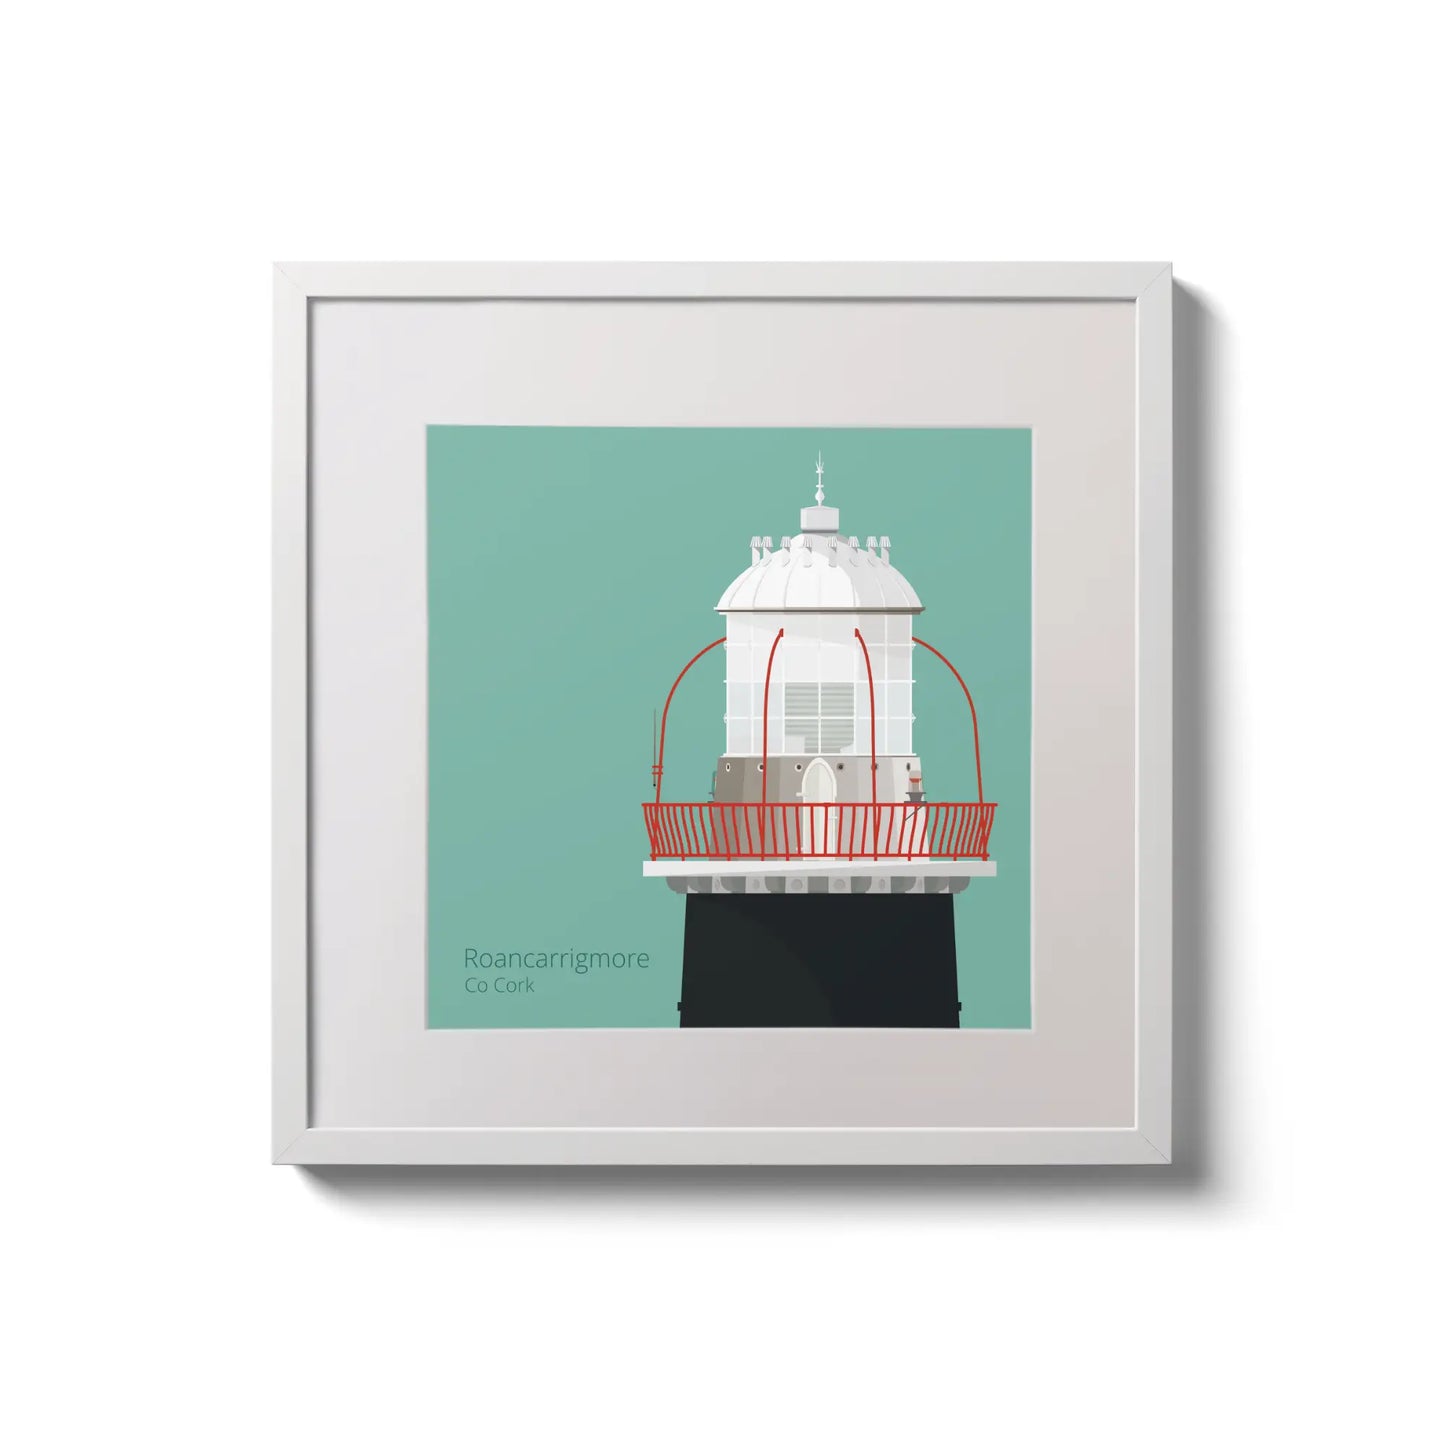 Illustration of Roancarrigmore lighthouse on an ocean green background,  in a white square frame measuring 20x20cm.